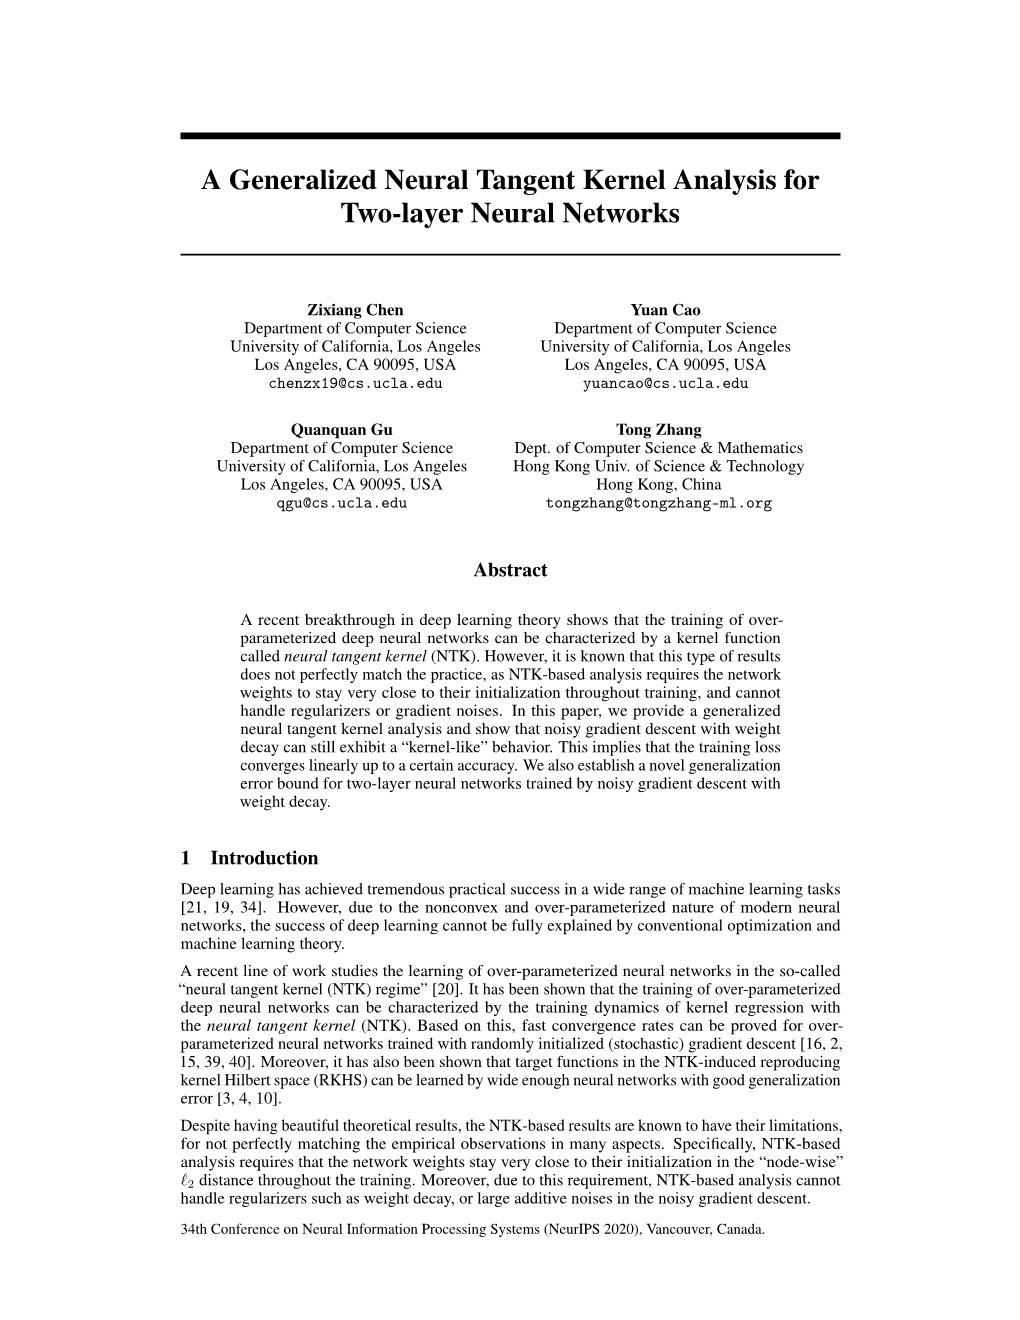 A Generalized Neural Tangent Kernel Analysis for Two-Layer Neural Networks